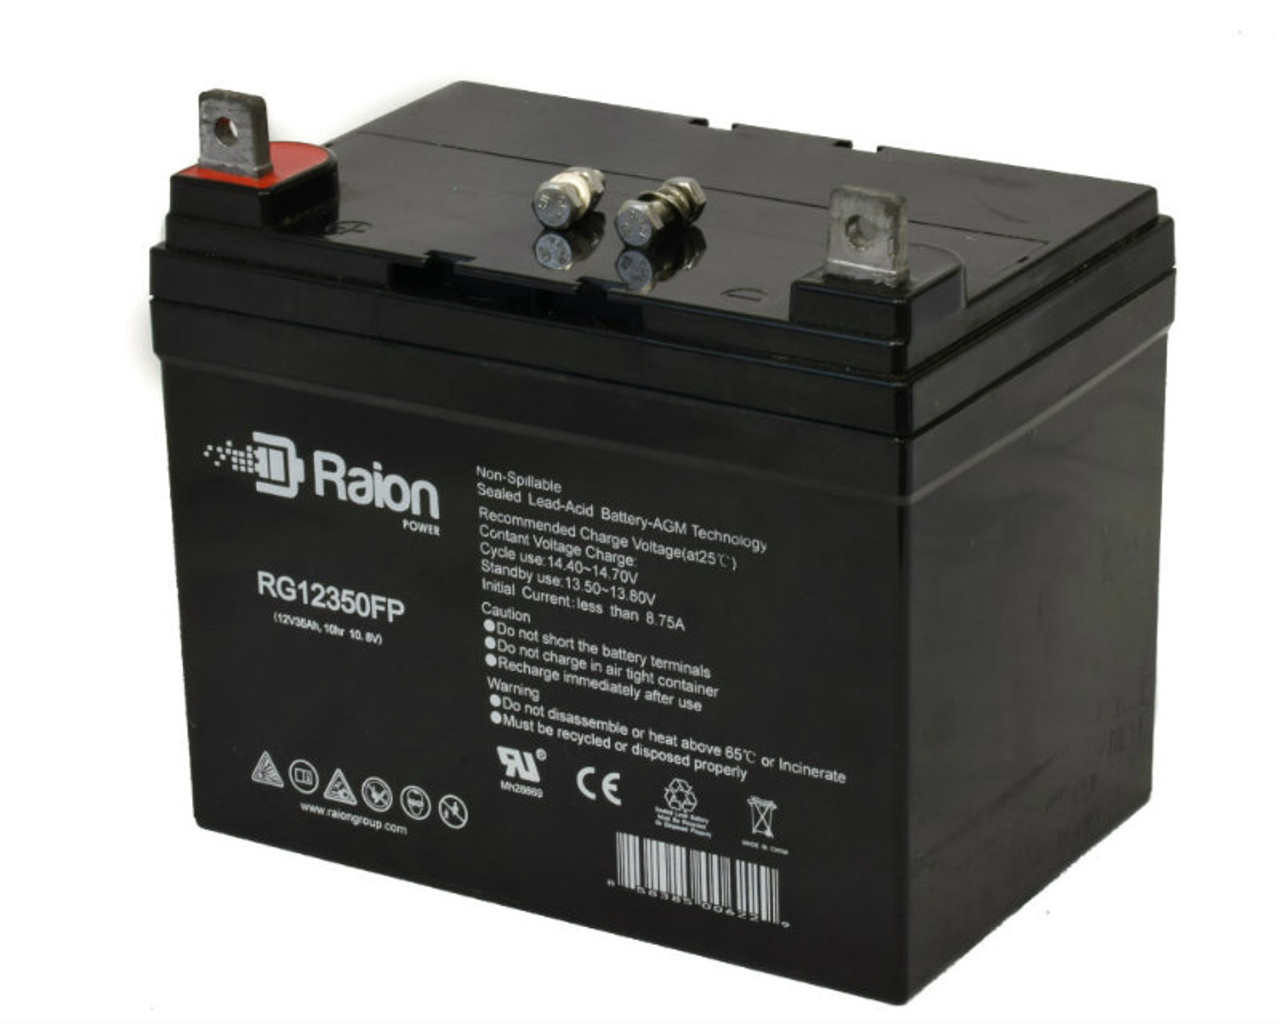 Raion Power Replacement 12V 35Ah Battery for Sabre (By John Deere) 1846HV - 1 Pack